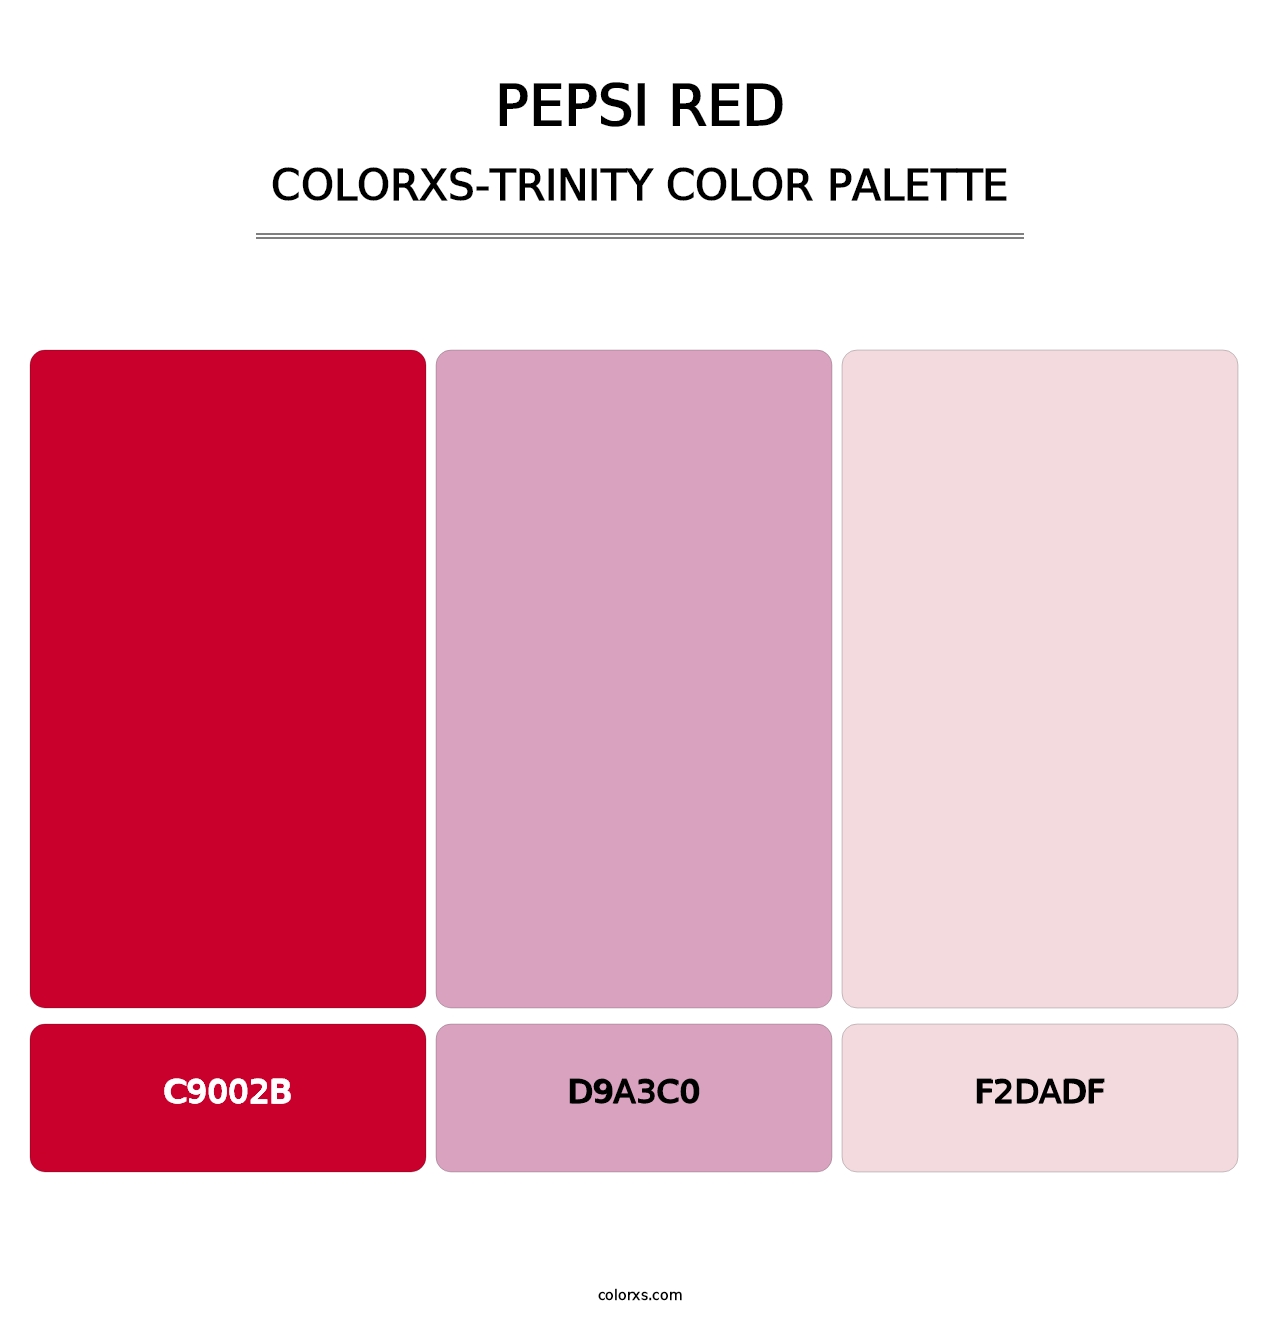 Pepsi Red - Colorxs Trinity Palette